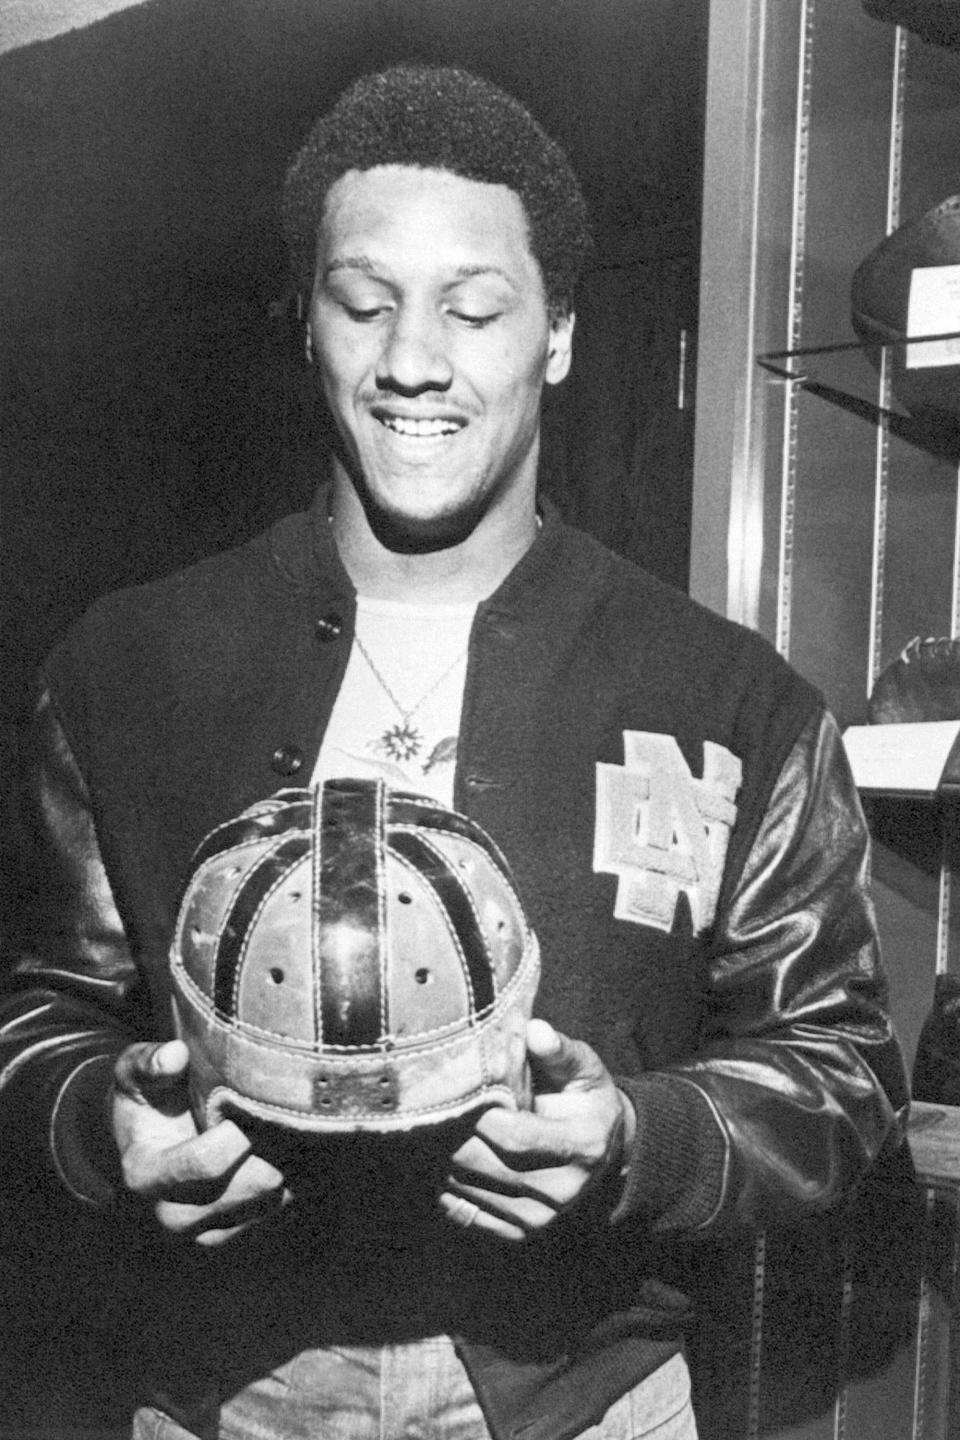 FILE - University of Notre Dame's Ross Browner smiles after being named Associated Press Lineman of the Week, at South Bend, Ind., Wednesday, Oct. 27, 1976. The Notre Dame junior defensive end had 11 tackles including five for losses against South Carolina on Saturday, Oct. 23. Browner, a two-time All-American at Notre Dame and one of four brothers who played in the NFL, has died. He was 67. Browner's son, former NFL offensive lineman Max Starks, posted on Twitter early Wednesday morning, Jan. 5, 2022, that his father had died. Browner is holding a pre-World War II Notre Dame helmet. (AP Photo/File)